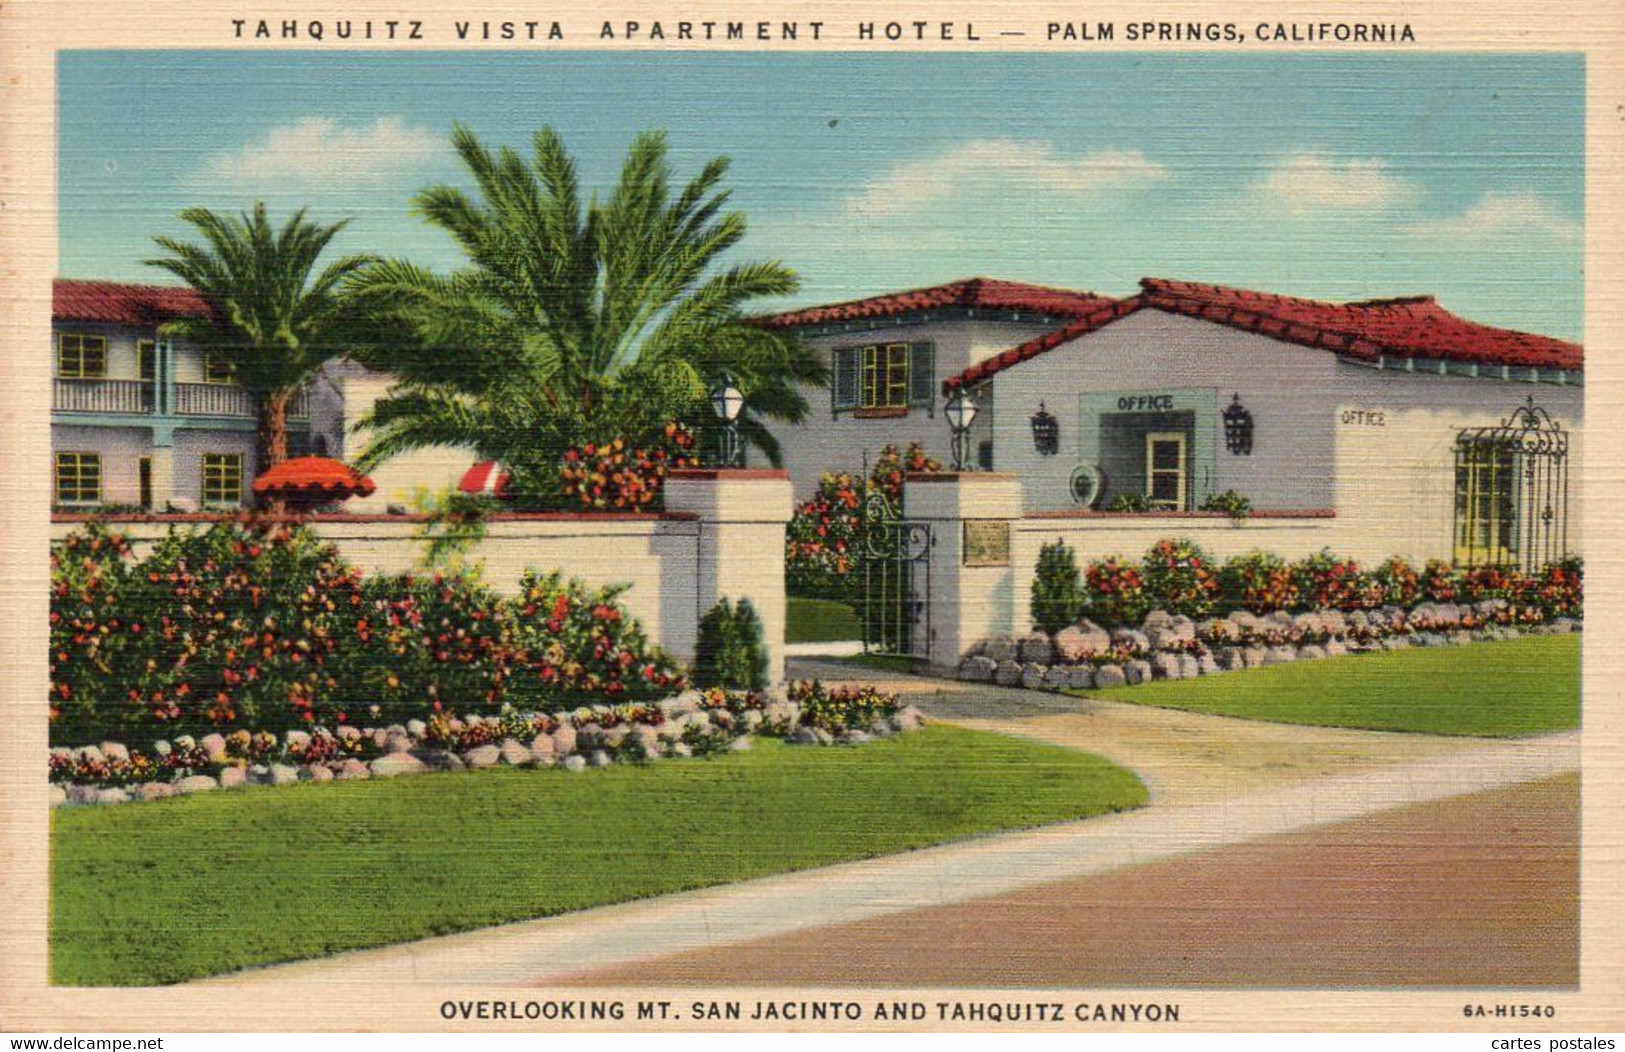 TAHQUITZ Vista Apartment Hotel - Palm Springs CALIFORNIA Overlooking MT. Jacinto And Tahquitz Canyon - Palm Springs